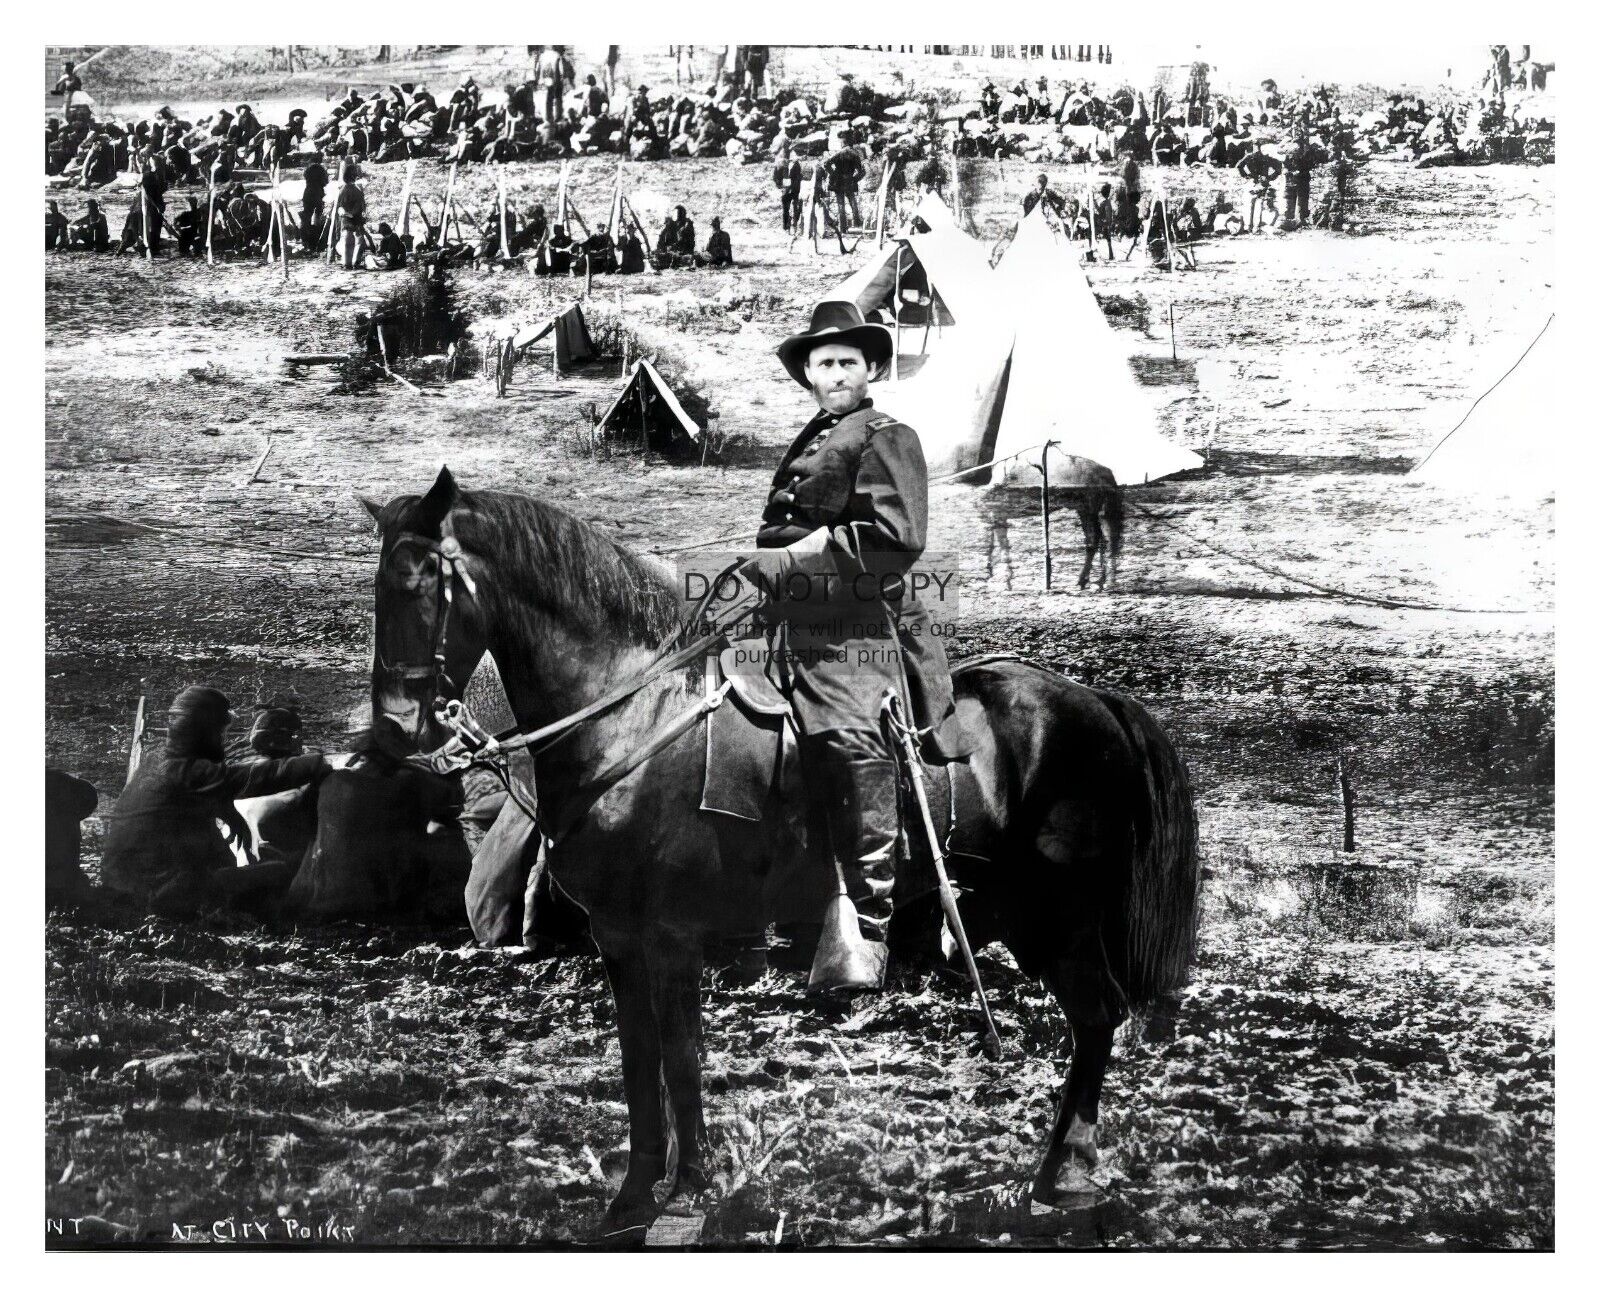 PRESIDENT ULYSSES S. GRANT RIDING HORSE IN CIVIL WAR CAMP 8X10 PHOTO